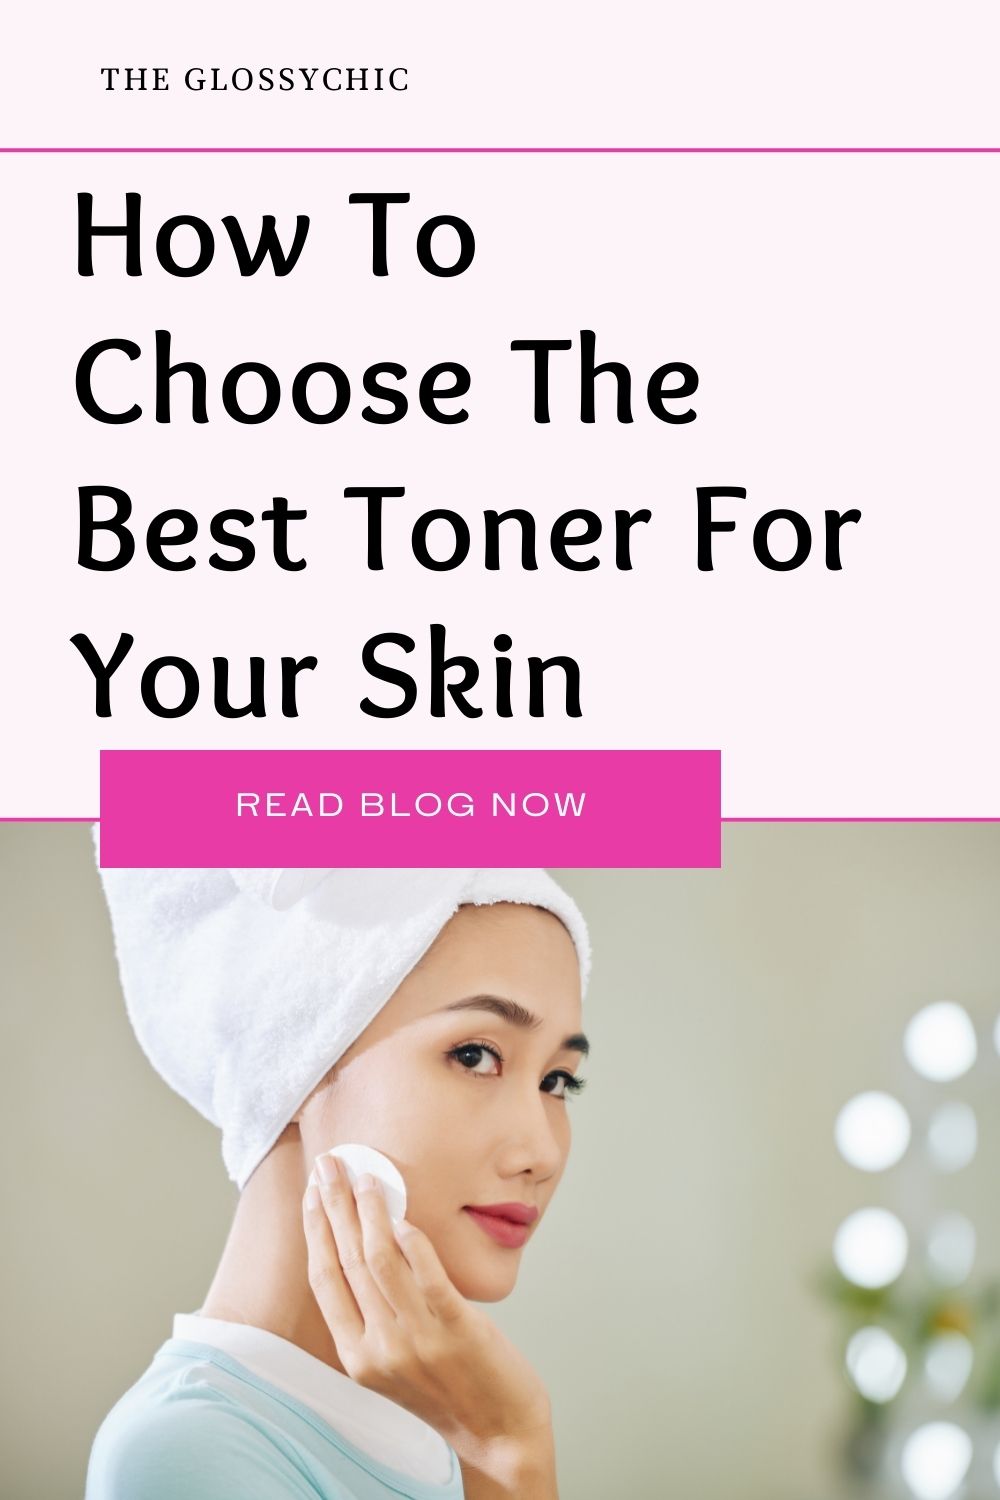 How To Choose The Best Toner For Your Skin